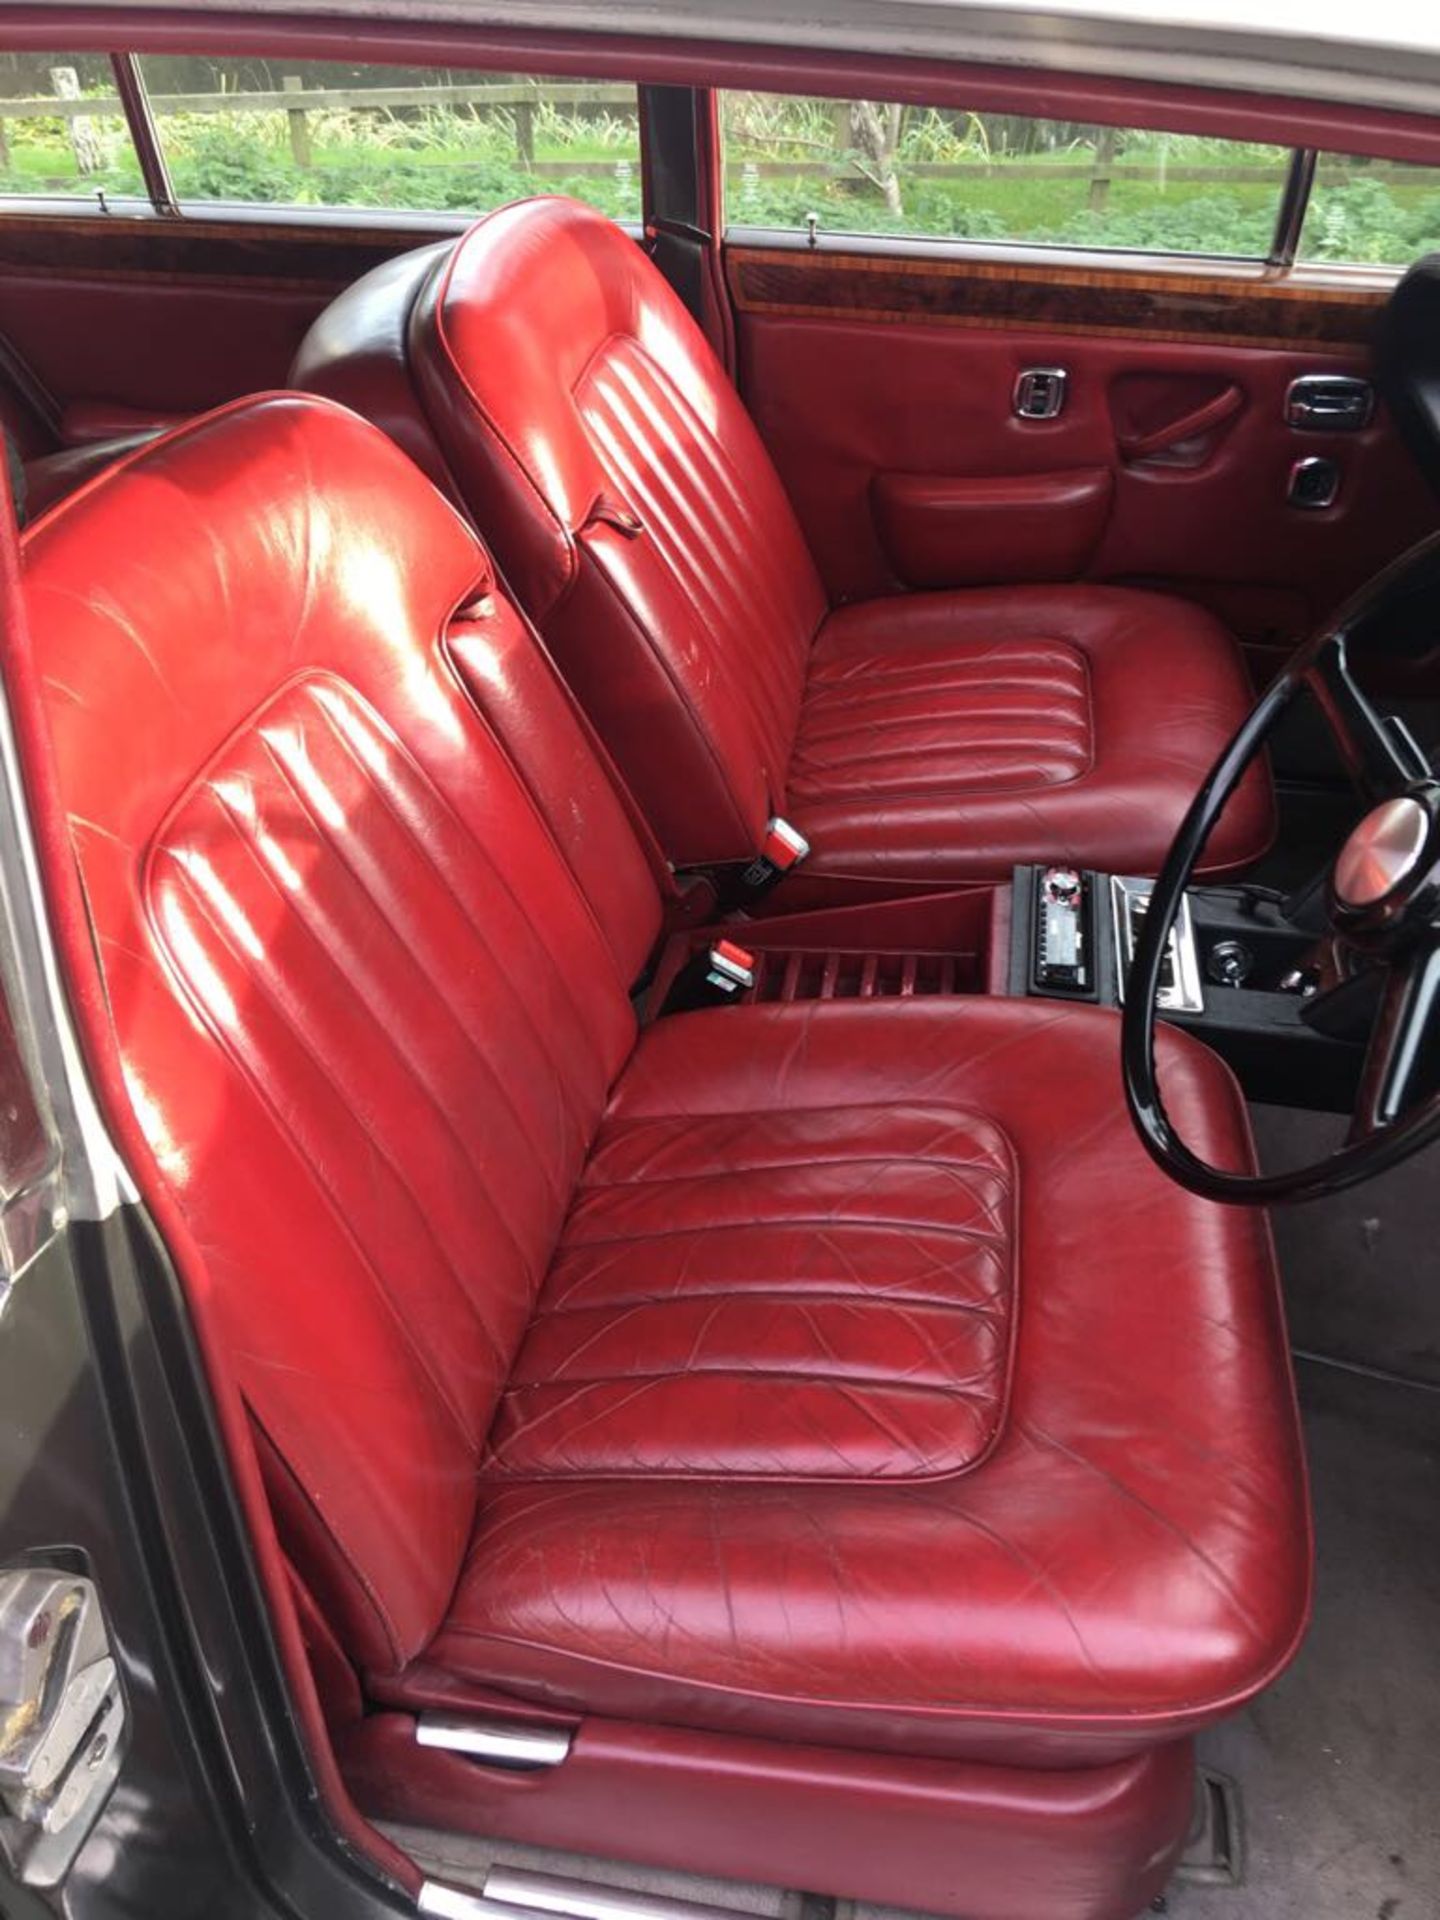 1974 ROLLS ROYCE SHADOW 1 **LOW MILEAGE & RED LEATHER** - Image 10 of 28